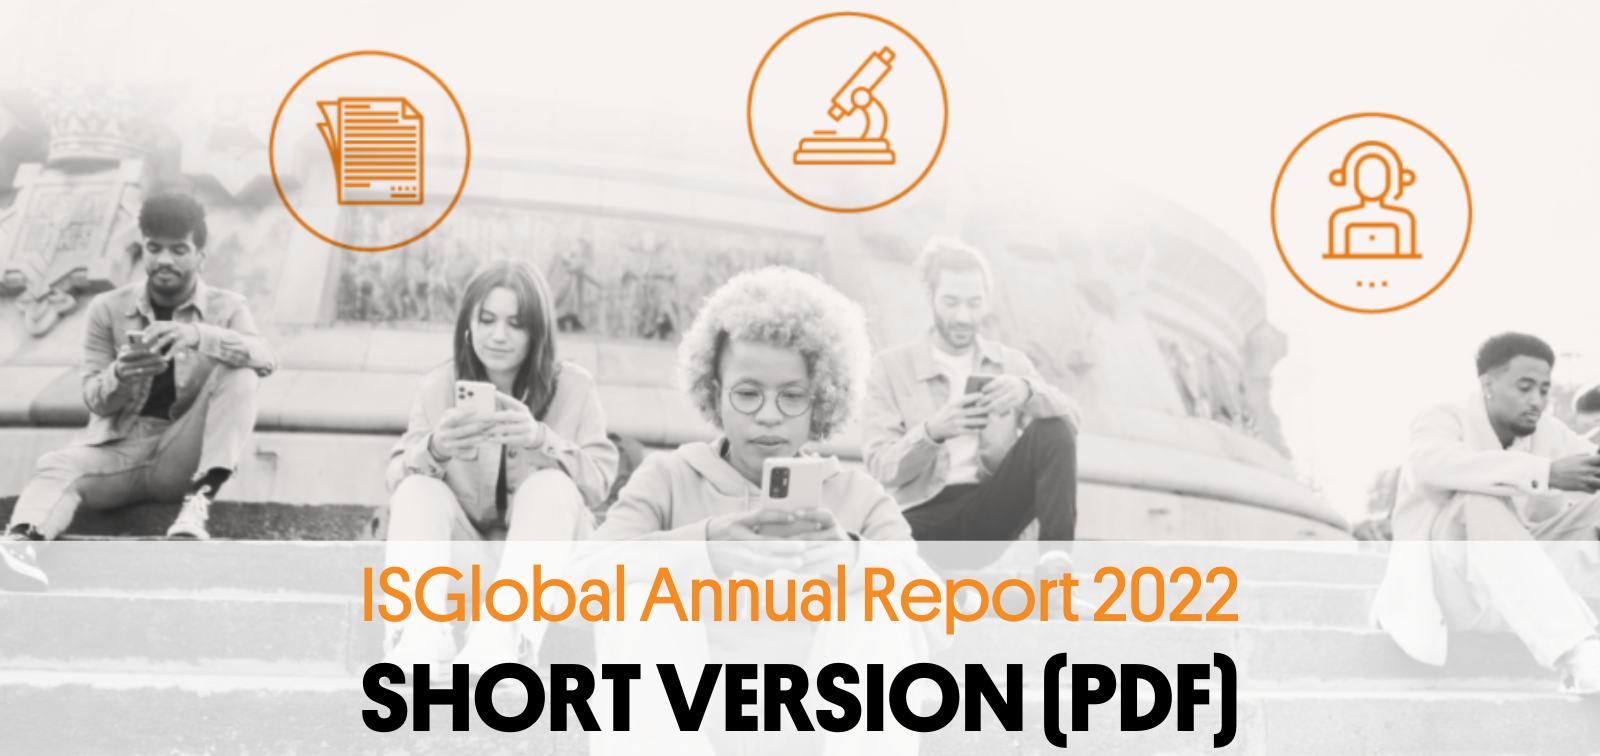 Image for the ISGlobal Annual Report 2022